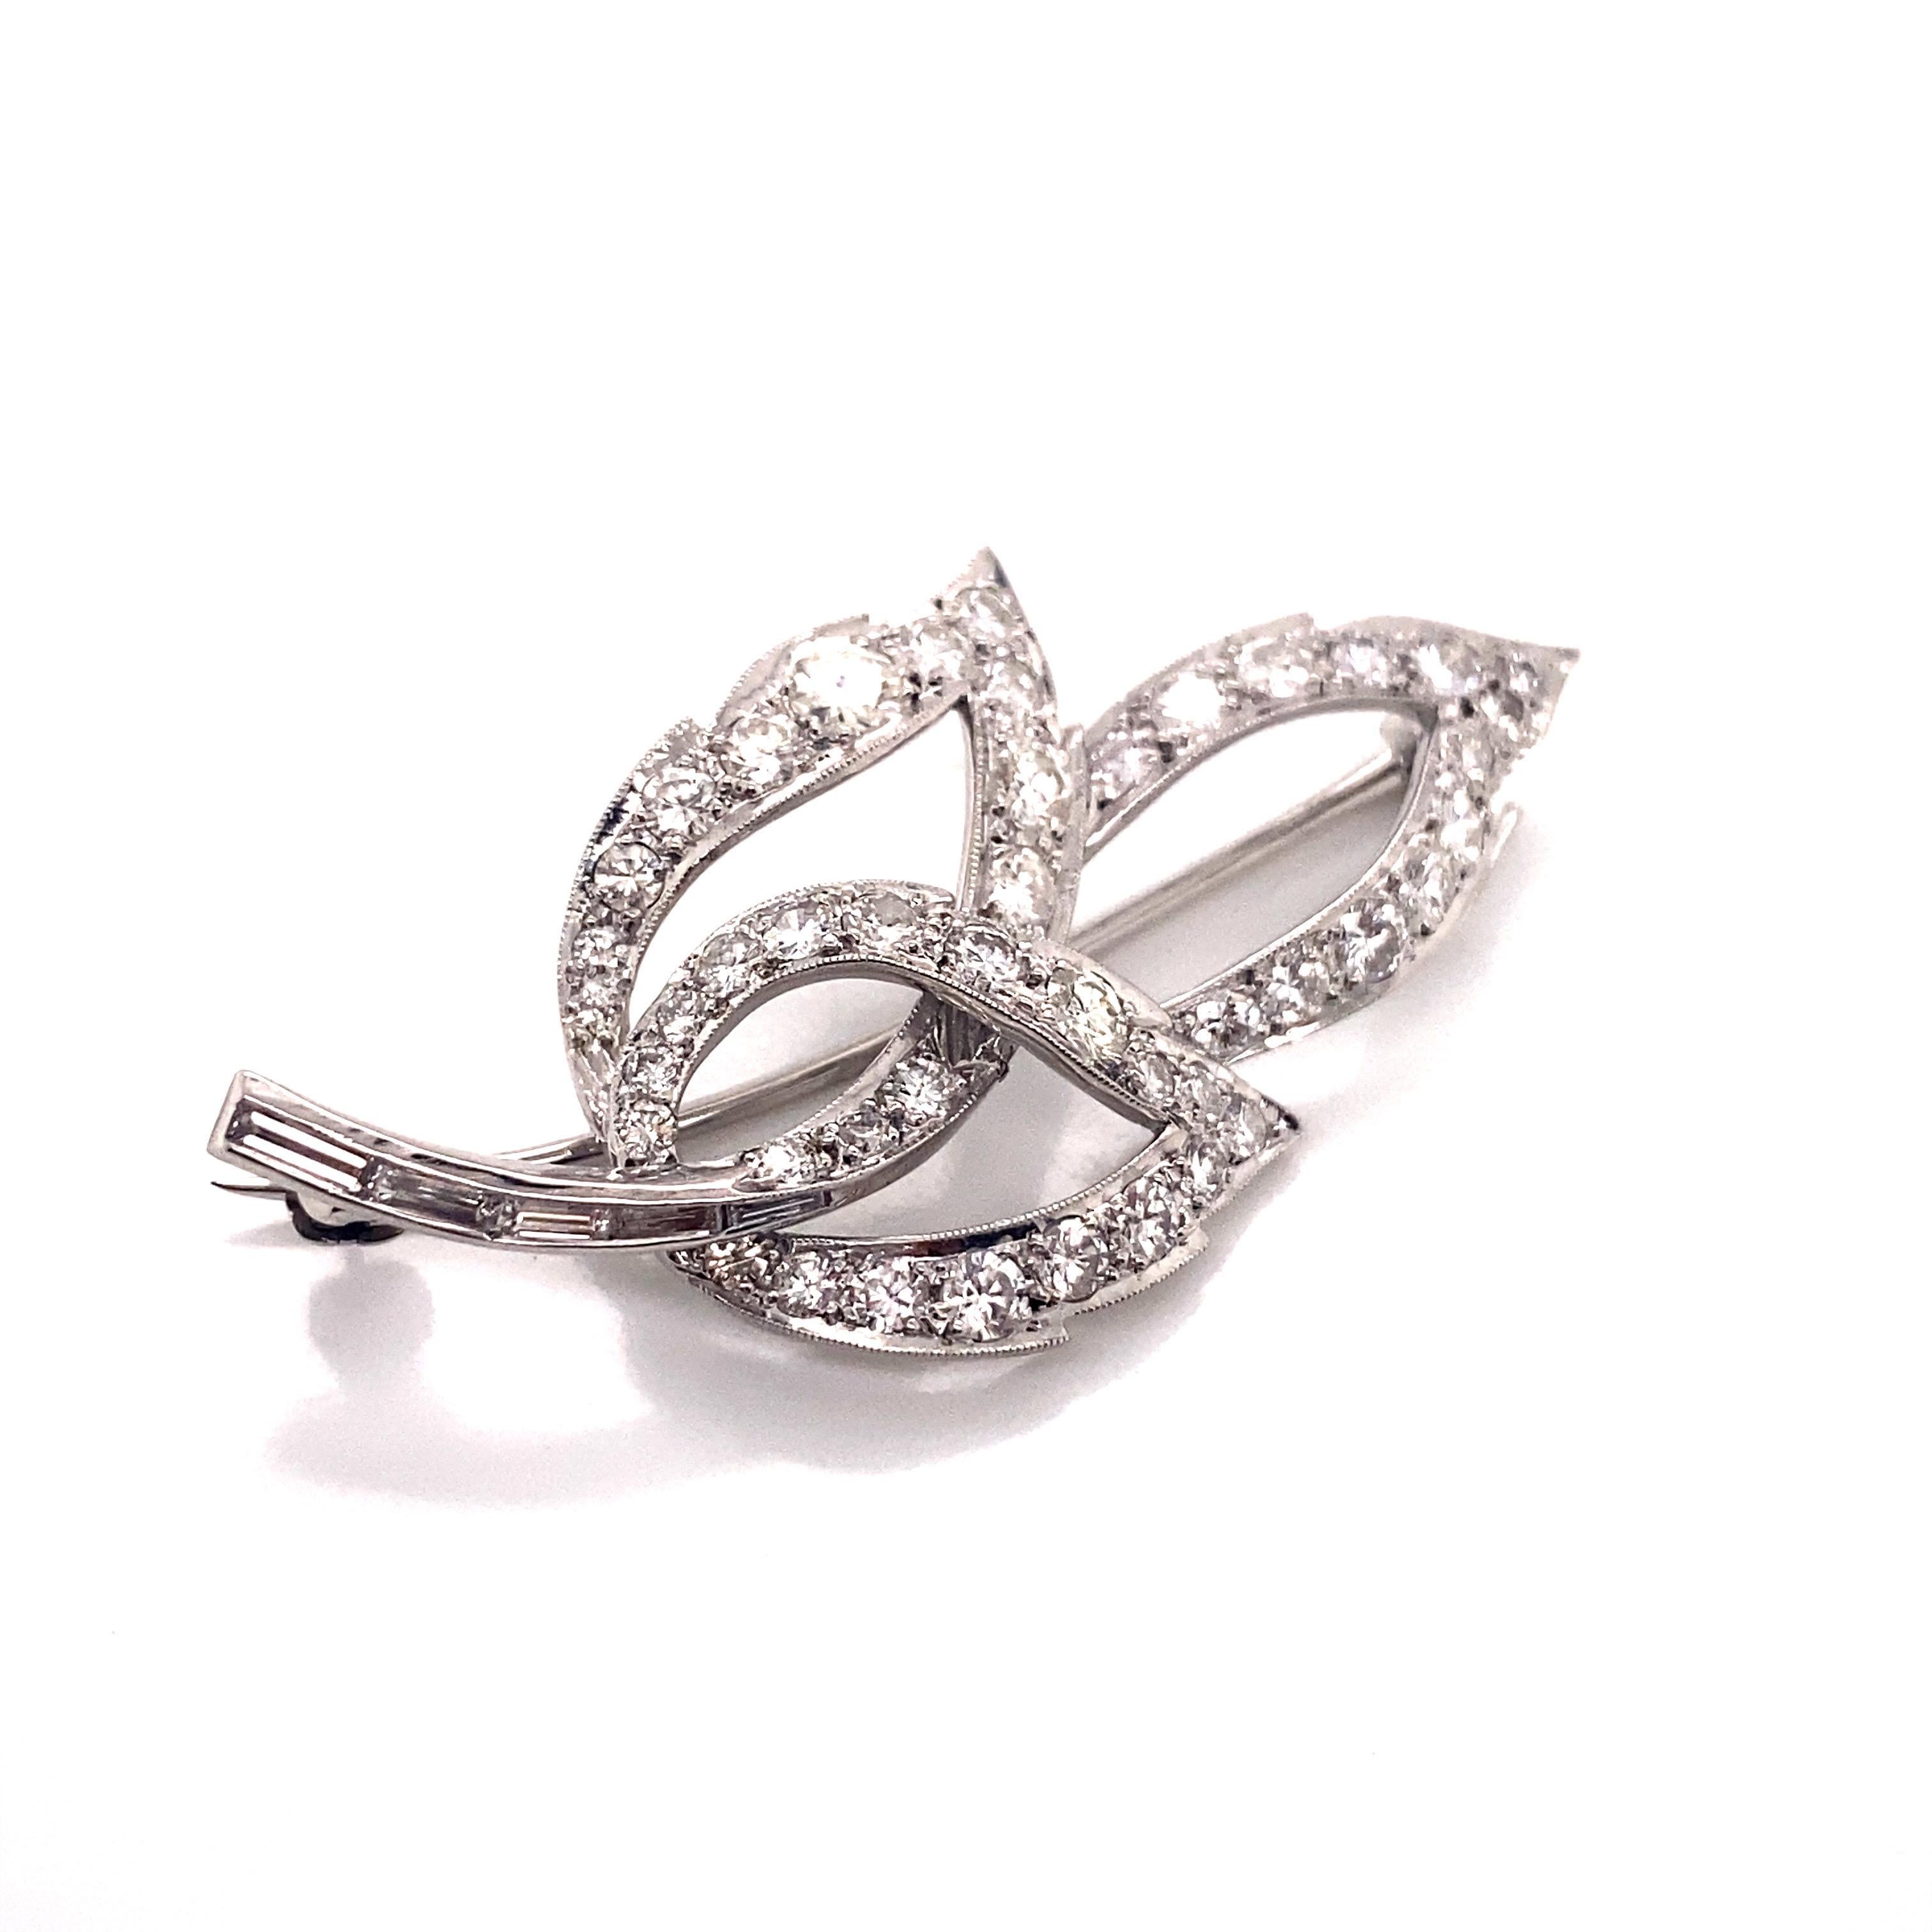 This exquisite vintage pin from the 1960s is a breathtaking representation of nature's beauty, rendered in lustrous platinum and dazzling diamonds. Crafted with meticulous attention to detail, it takes the form of an elegant leaf, a timeless symbol